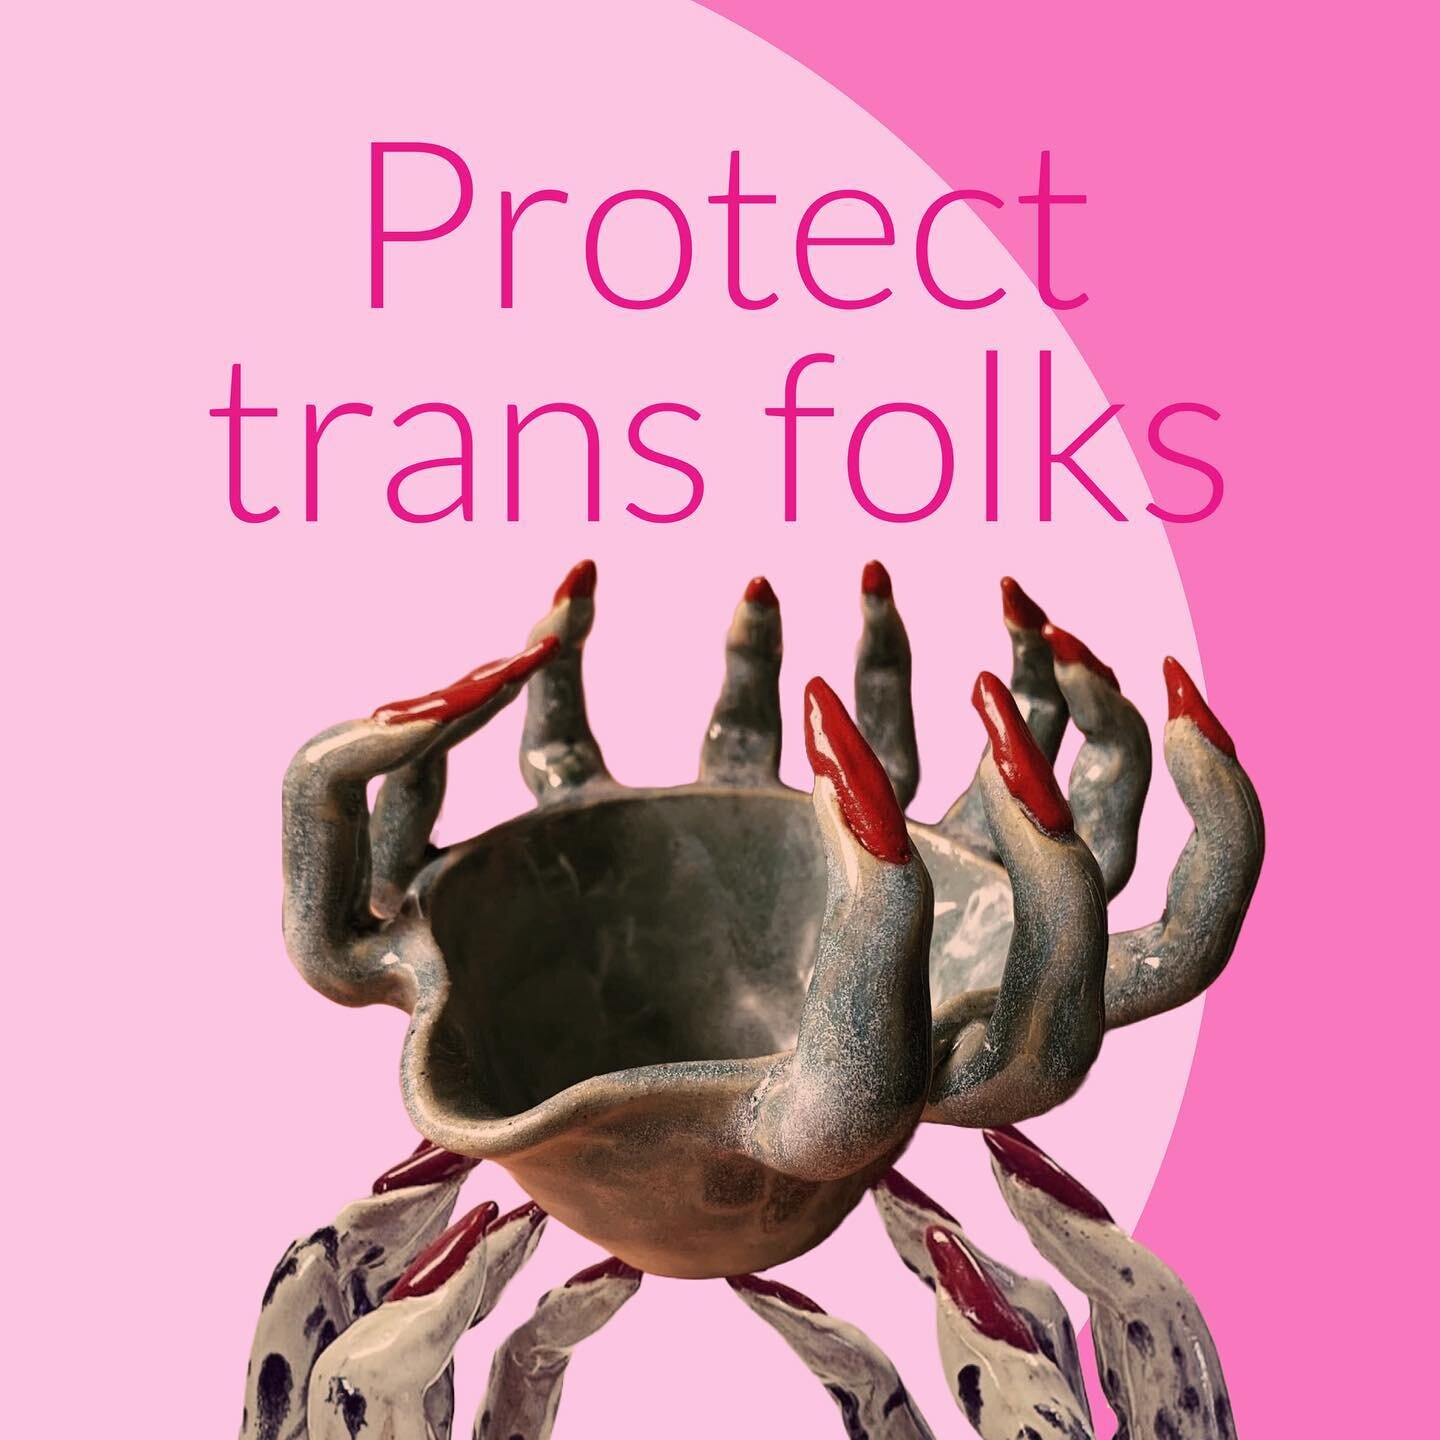 As we all know trans folks are under attack. Dangerous laws are being passed that put trans people in harms way. @a.ro.lo started a fundraiser for our siblings in TN. I&rsquo;m raffling off a custom ritual object to support this important mutual aid 